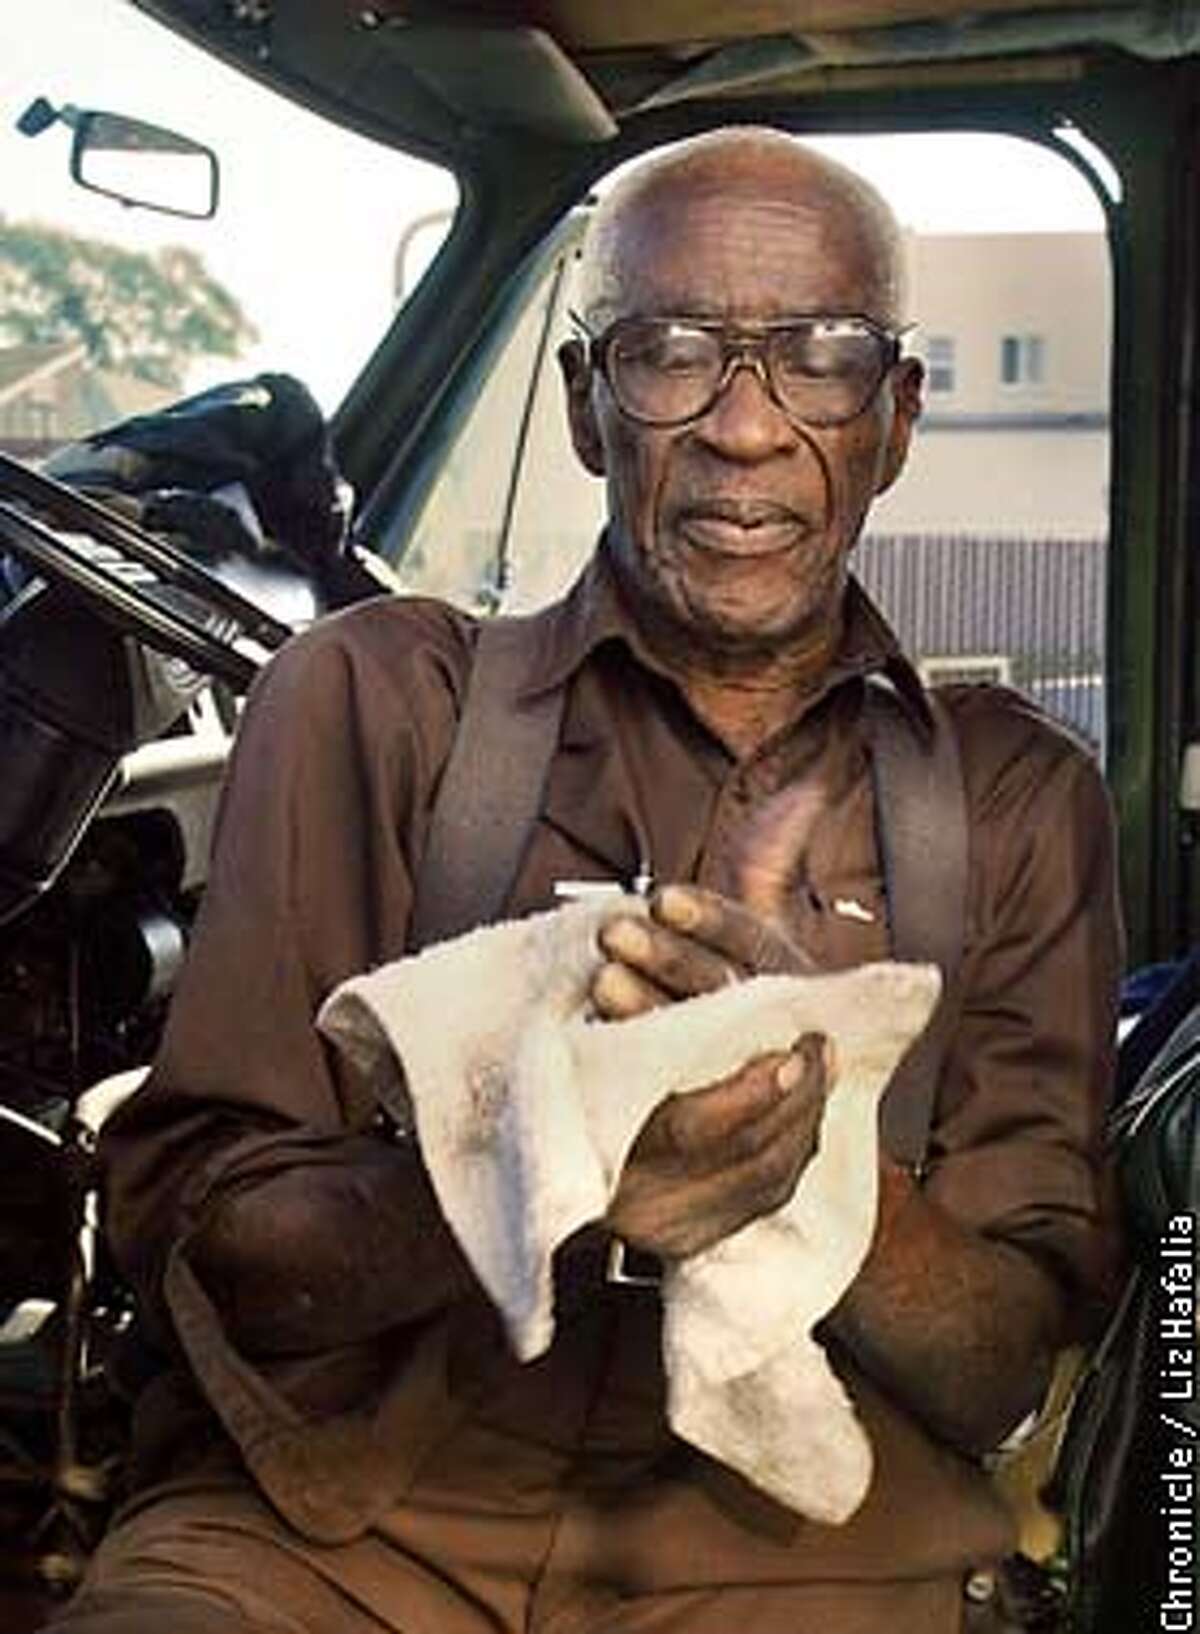 Hillary Luckett, 86 years old, has had his carwash since 1961. He now has a partner who runs an auto mechanic shop on his property. He is wiping his hands after fixing the engine in his van. (PHOTOGRAPHED BY LIZ HAFALIA/THE SAN FRANCISCO CHRONICLE)